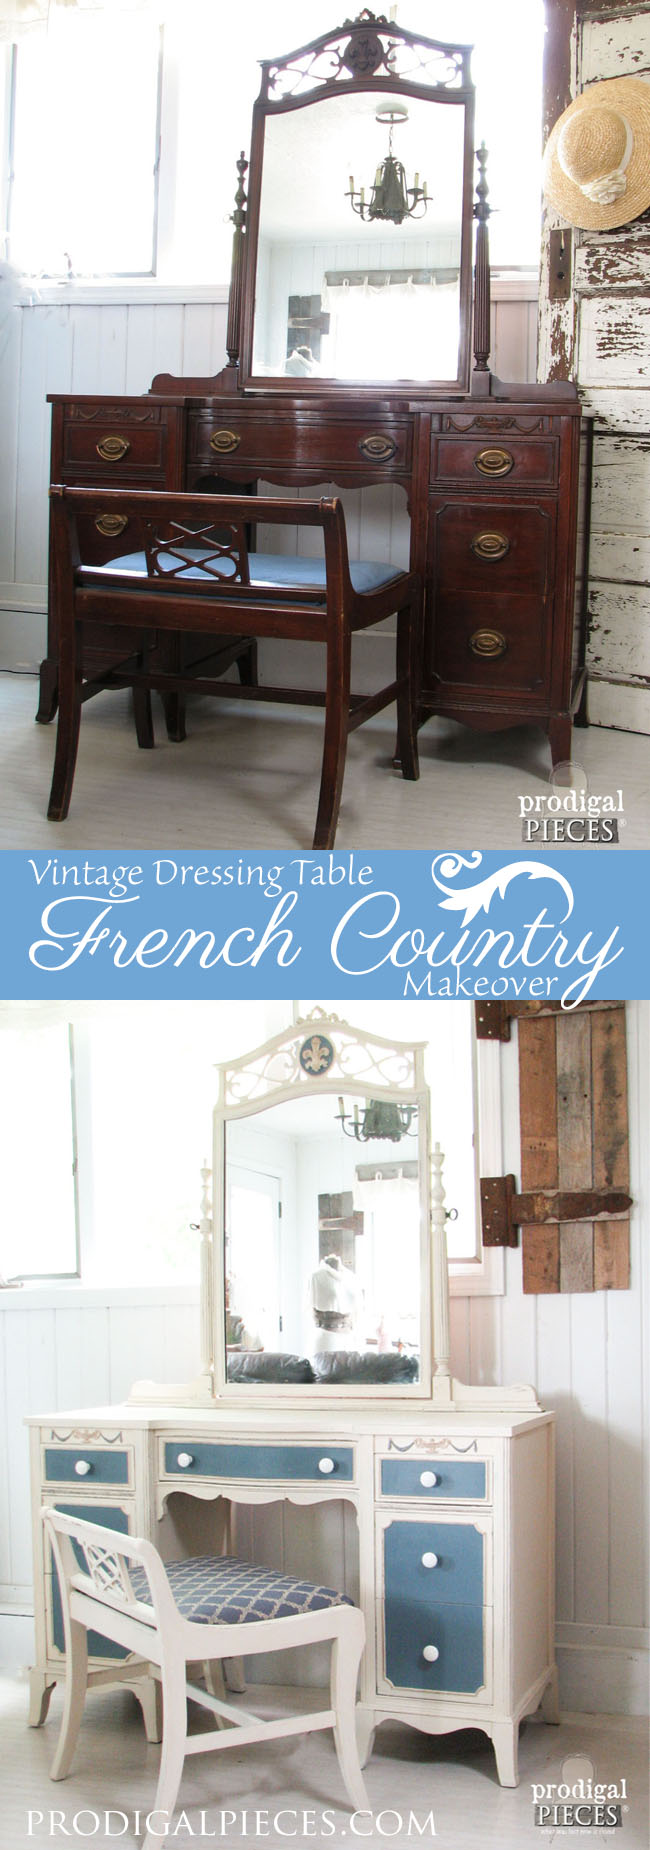 Vintage Dressing Table Gets a French Country Makeover by Prodigal Pieces www.prodigalpieces.com